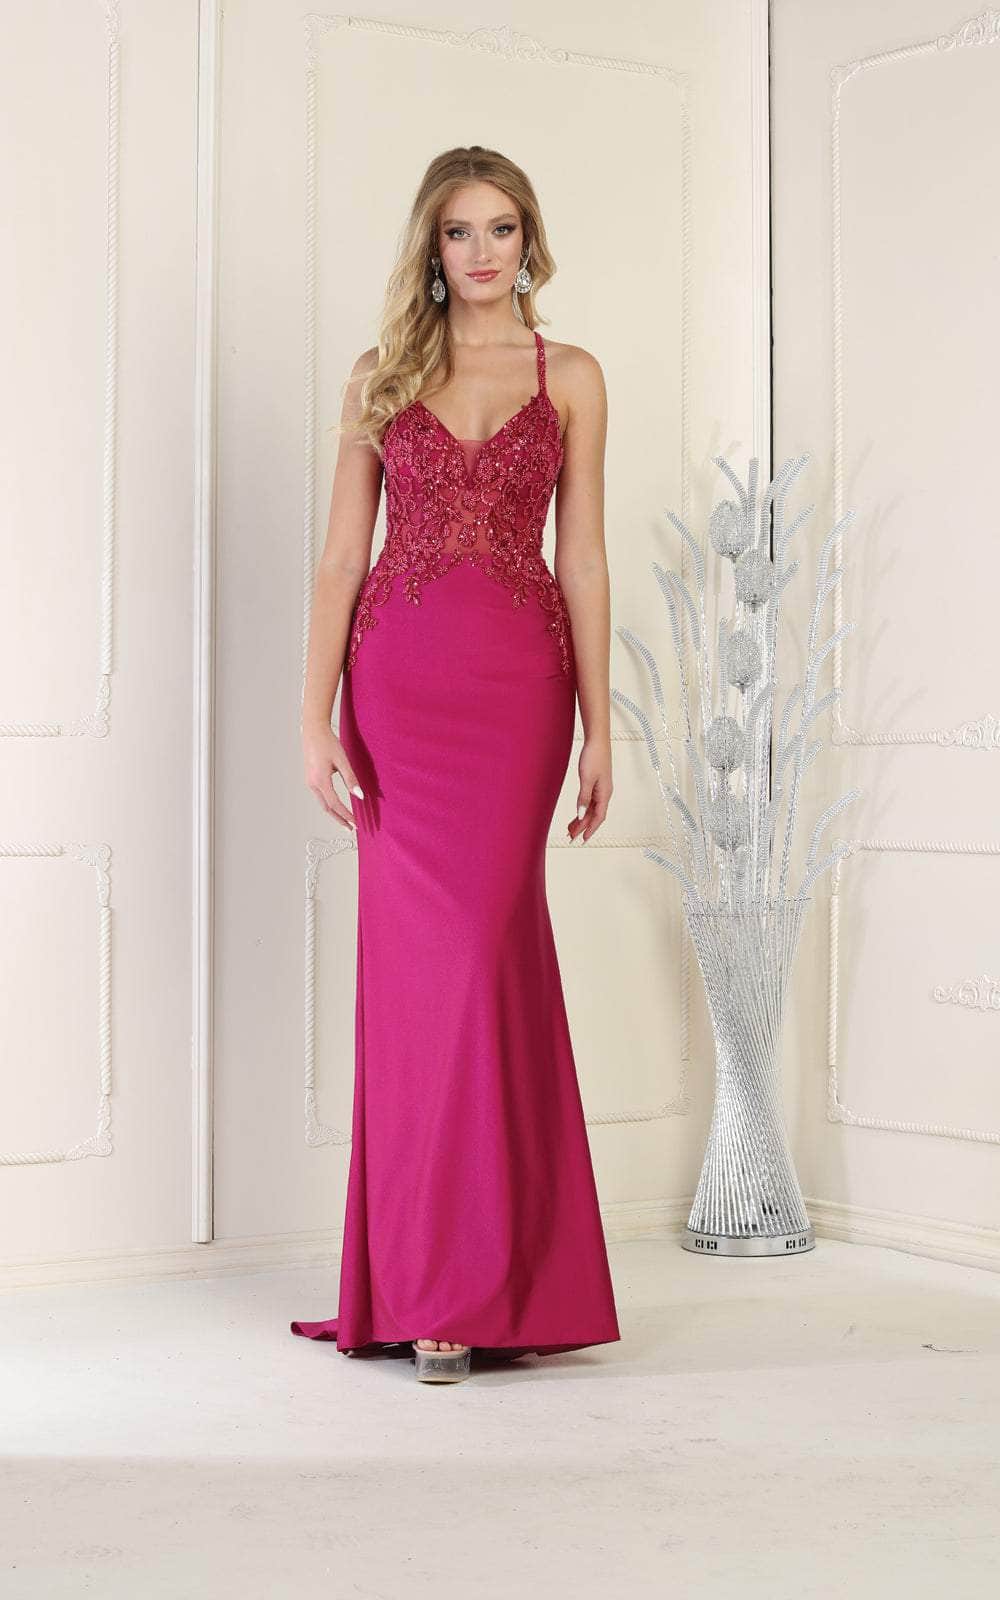 May Queen RQ7991 - Embellished Sleeveless Evening Dress Special Occasion Dress